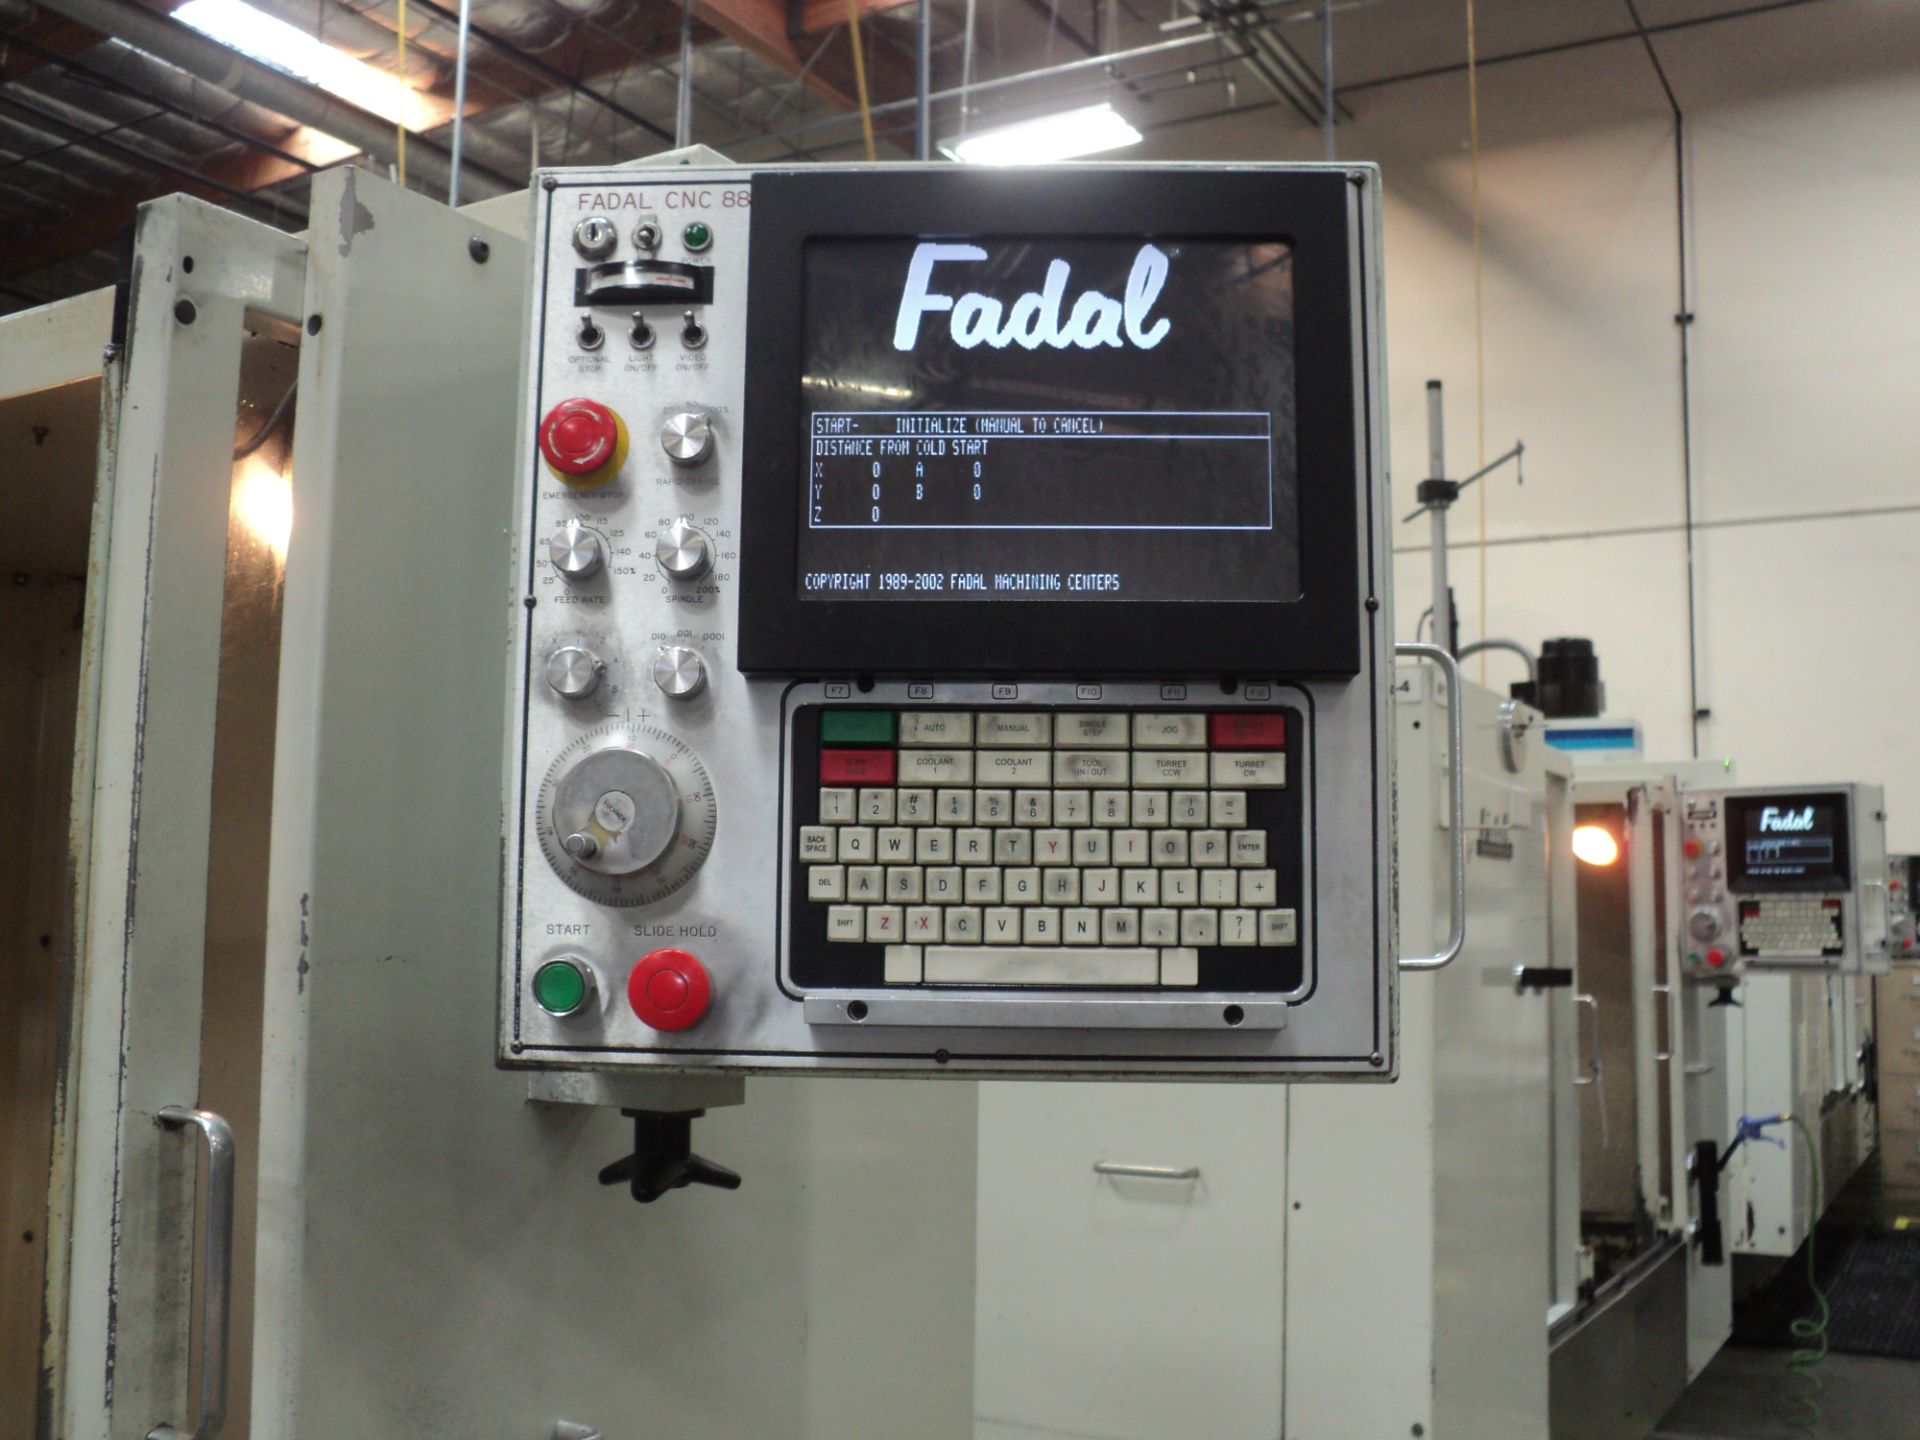 FADAL CNC VERTICAL MACHINING CENTER, VMC MODEL 4020 906-1, 3 AXIS 40"X20"X20" - Image 7 of 8